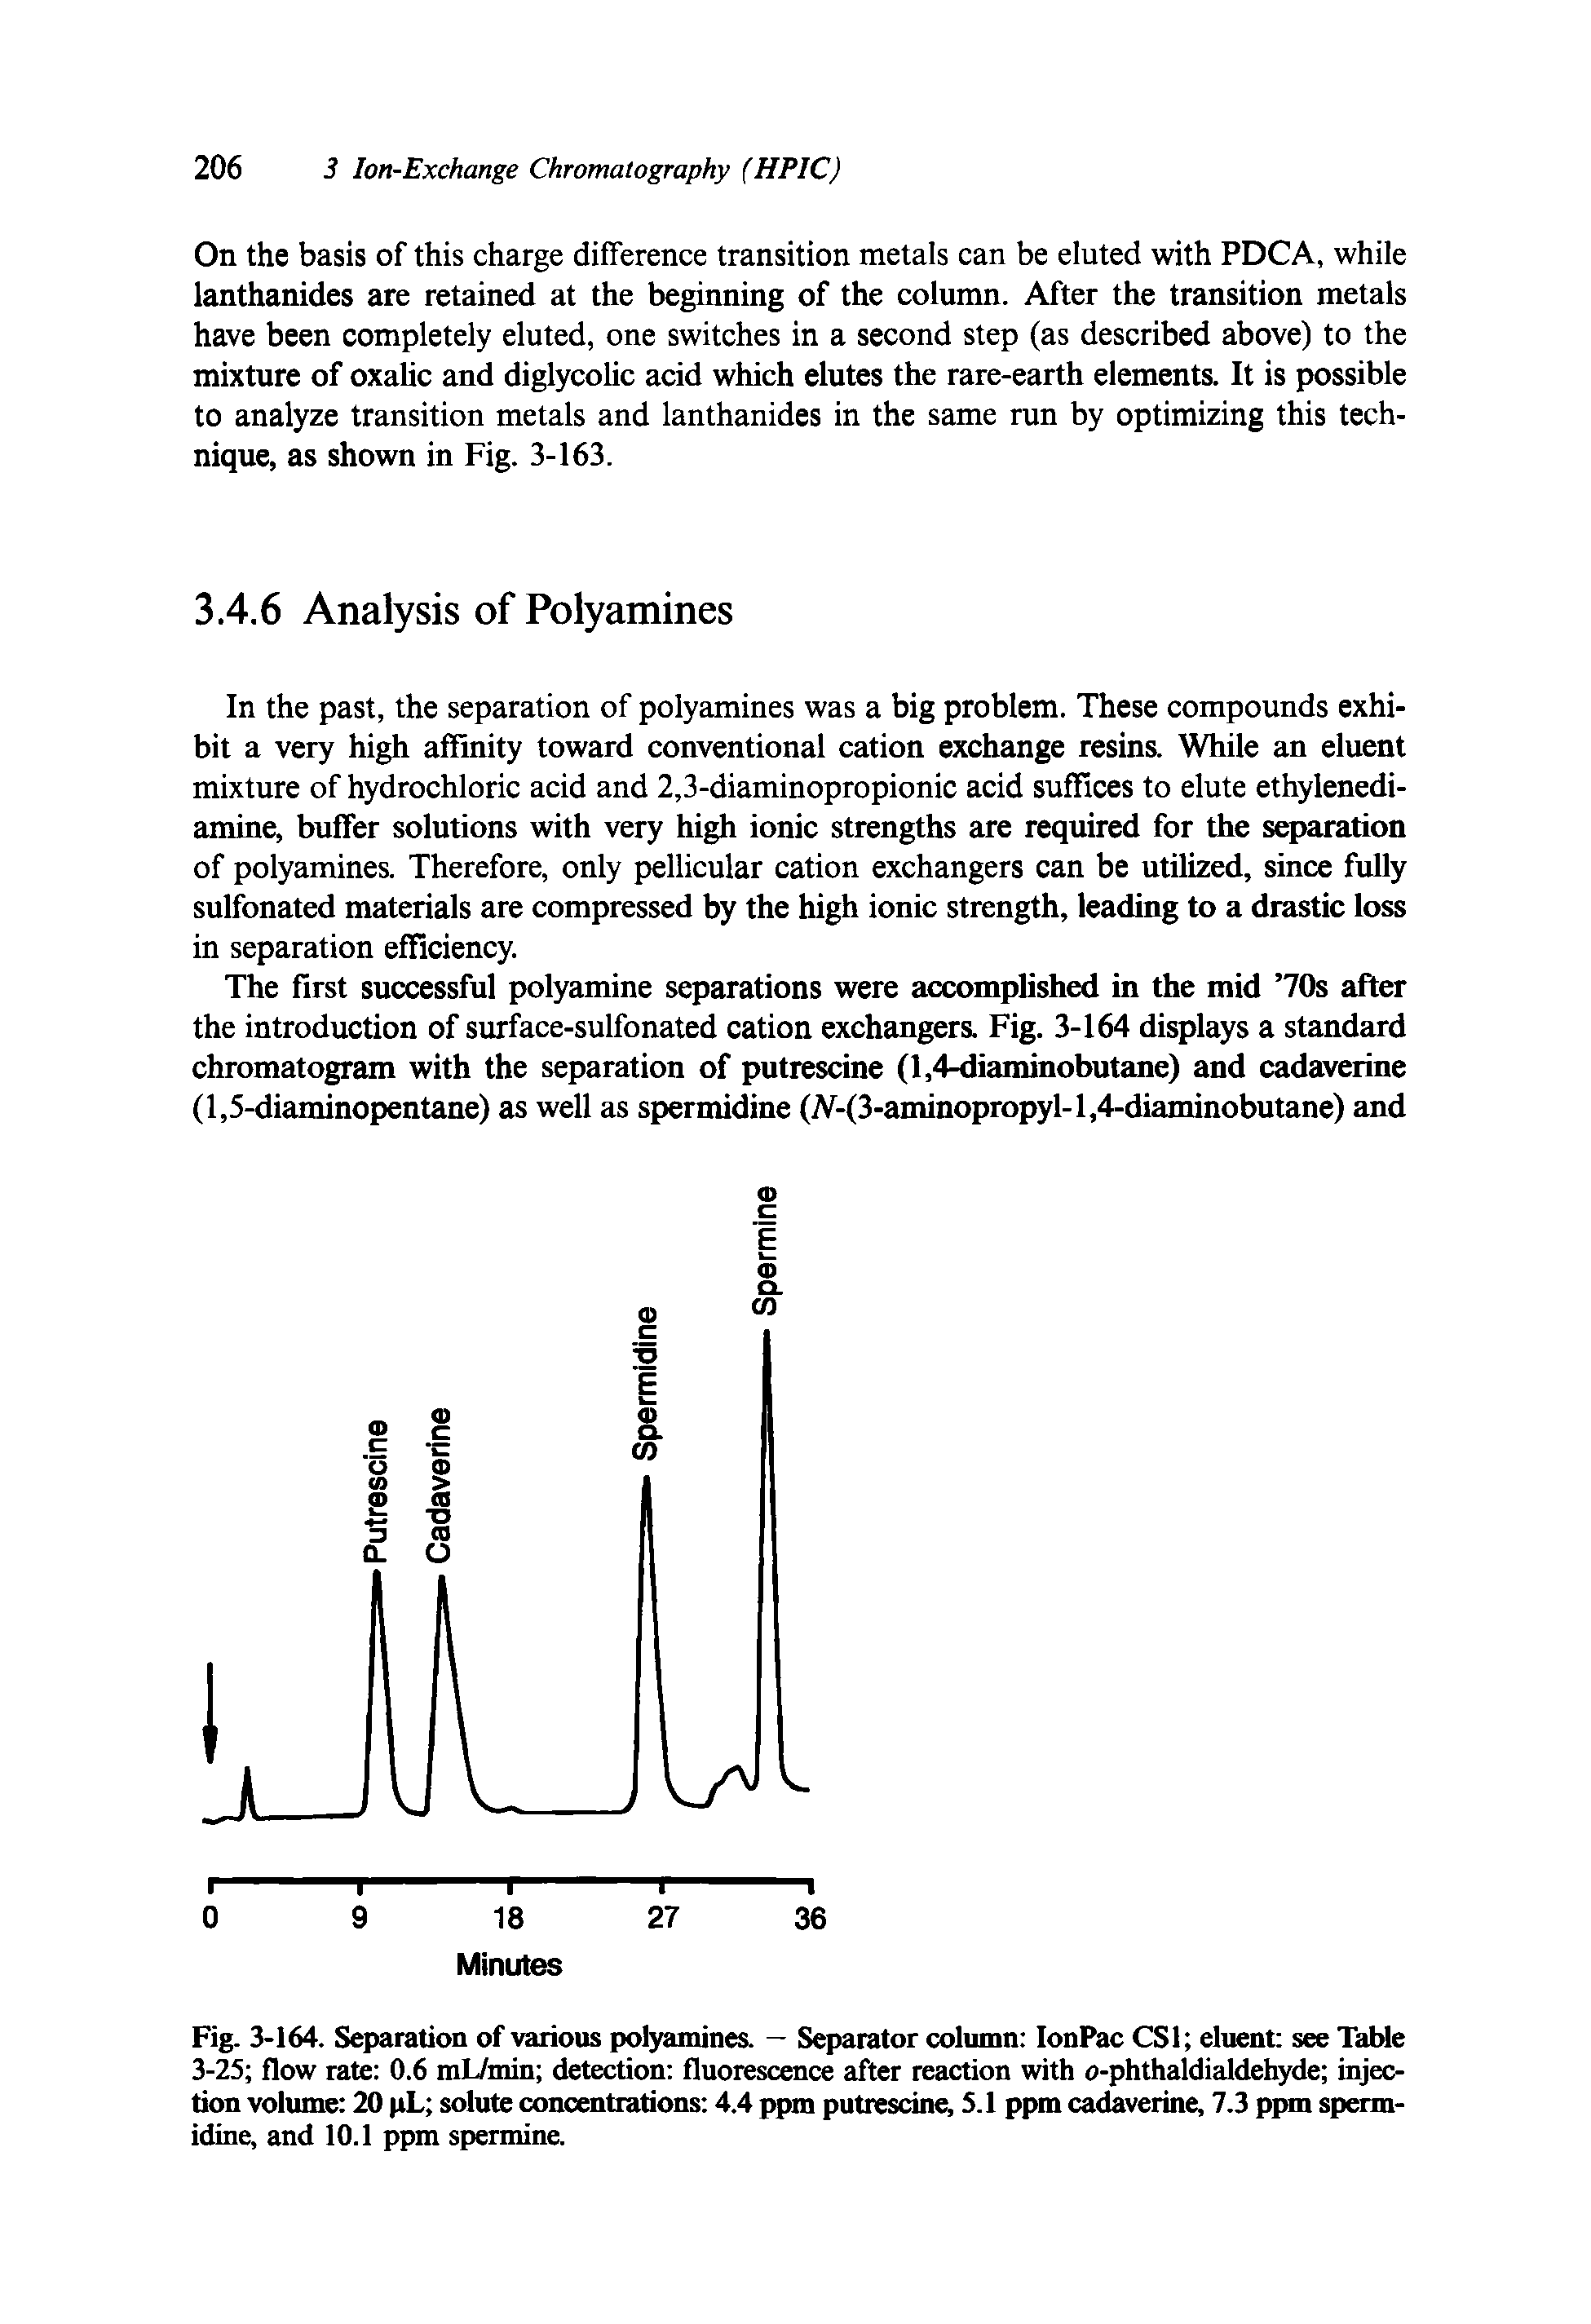 Fig. 3-164. Separation of various polyamines. — Separator column IonPac CS1 eluent see Table 3-25 flow rate 0.6 mL/min detection fluorescence after reaction with o-phthaldialdehyde injection volume 20 pL solute concentrations 4.4 ppm putrescine, 5.1 ppm cadaverine, 7.3 ppm spermidine, and 10.1 ppm spermine.